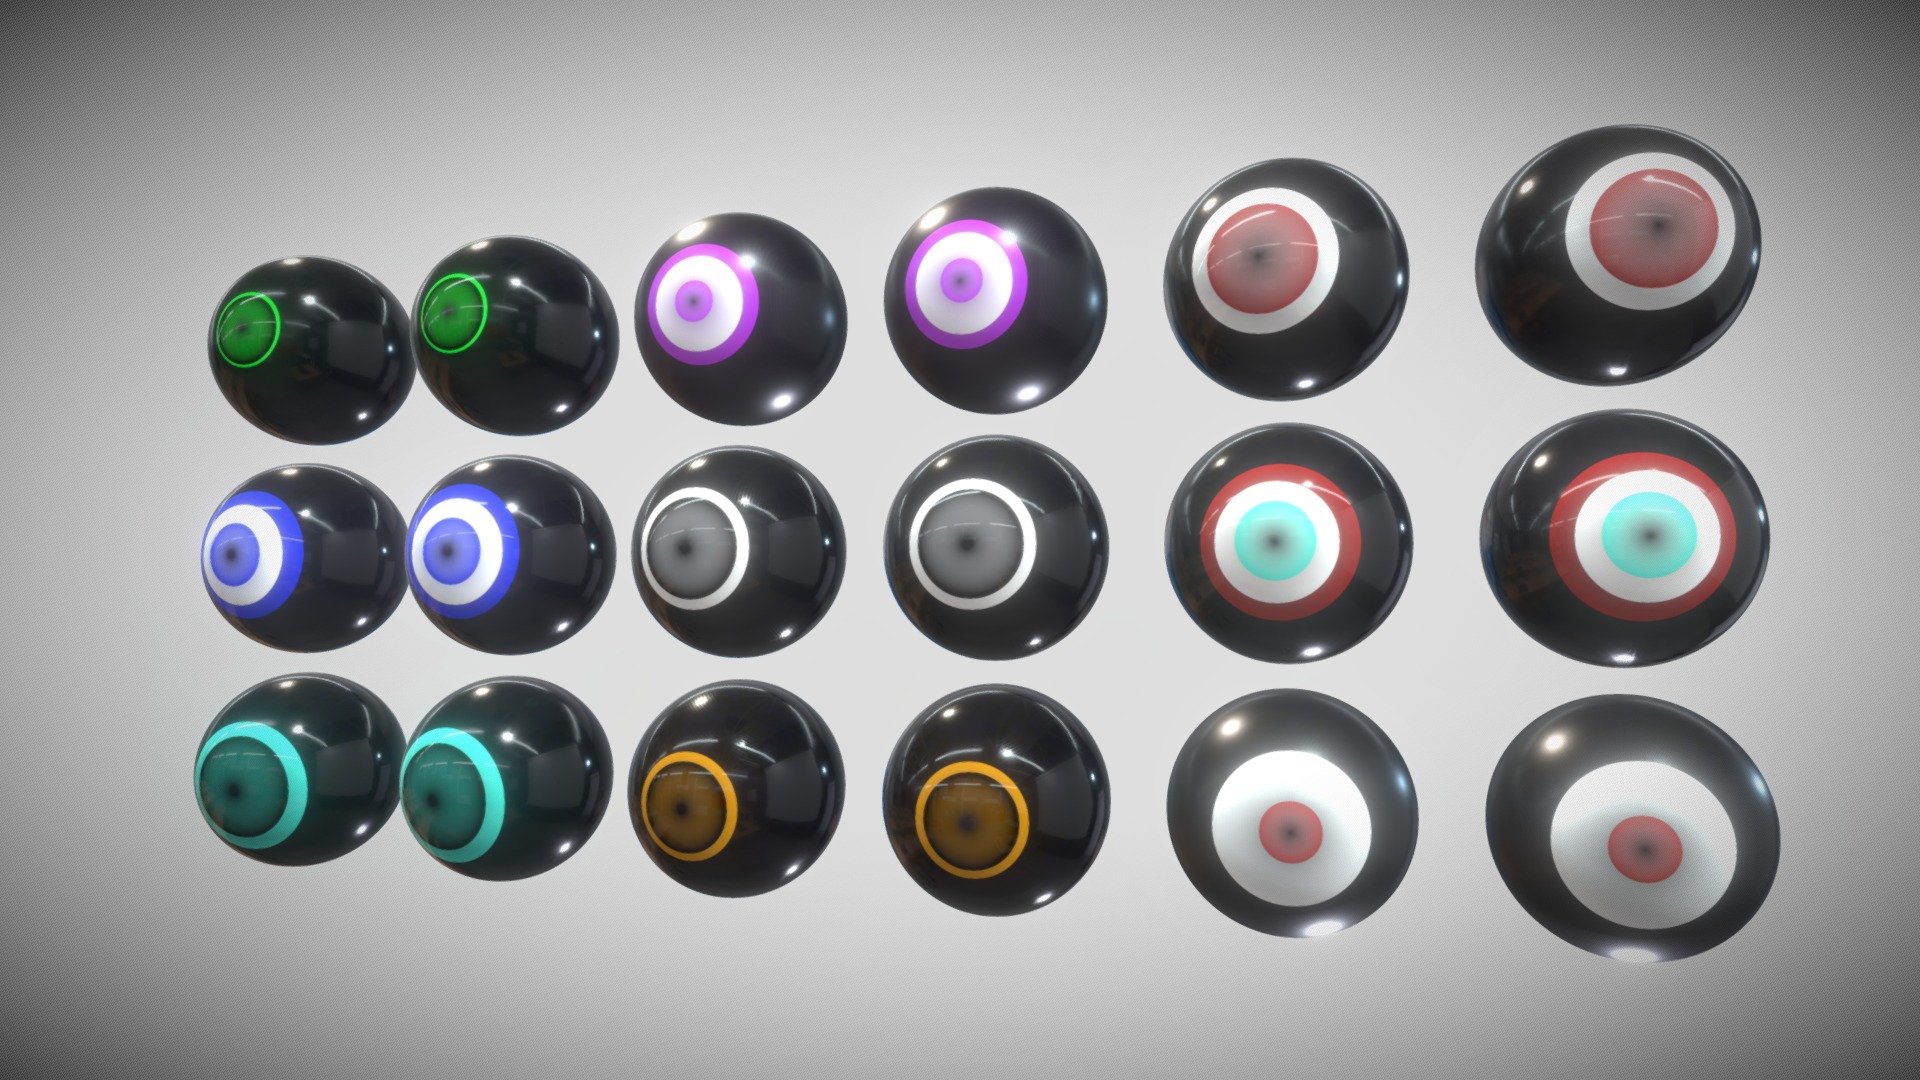 Anime, Robot and Cartoon Character Eye Pack Free

Free cc0 made for you.

Tip: Turn off emissions if enabled.

Zbrush Blender Substance Painter - Eyeballs Anime Cartoon Robot Eyes 4k Textures - Download Free 3D model by SculptCuteness 3d model